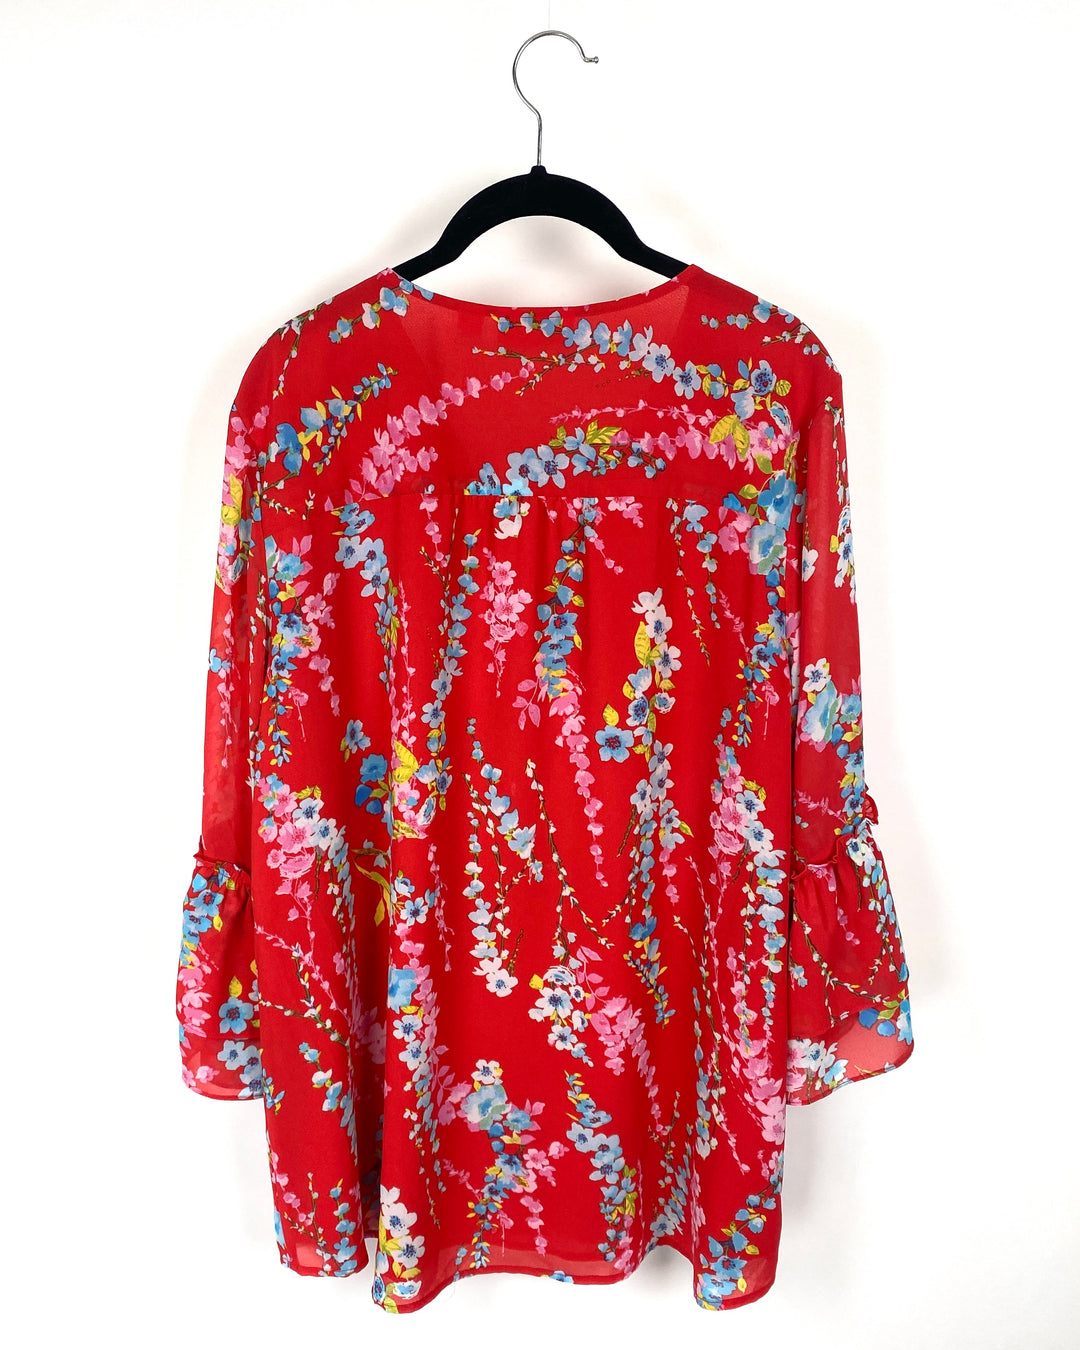 Red Button Up Floral Print Top - Large/Extra Large